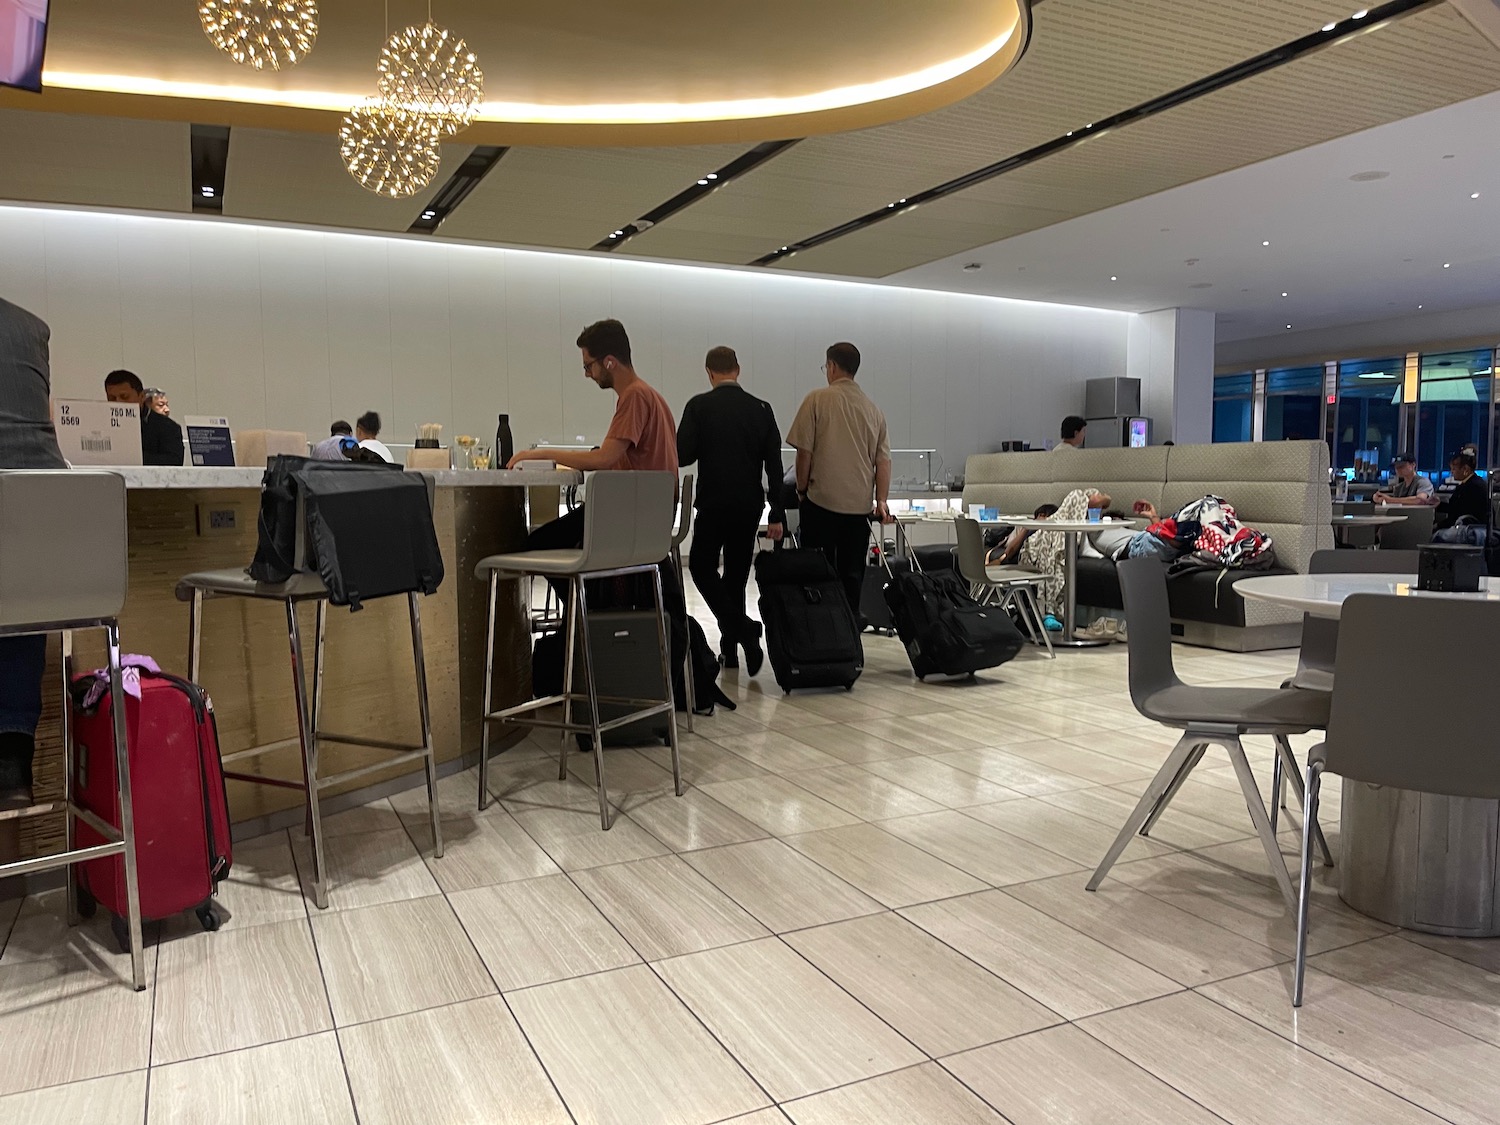 people standing at a counter in a room with luggage